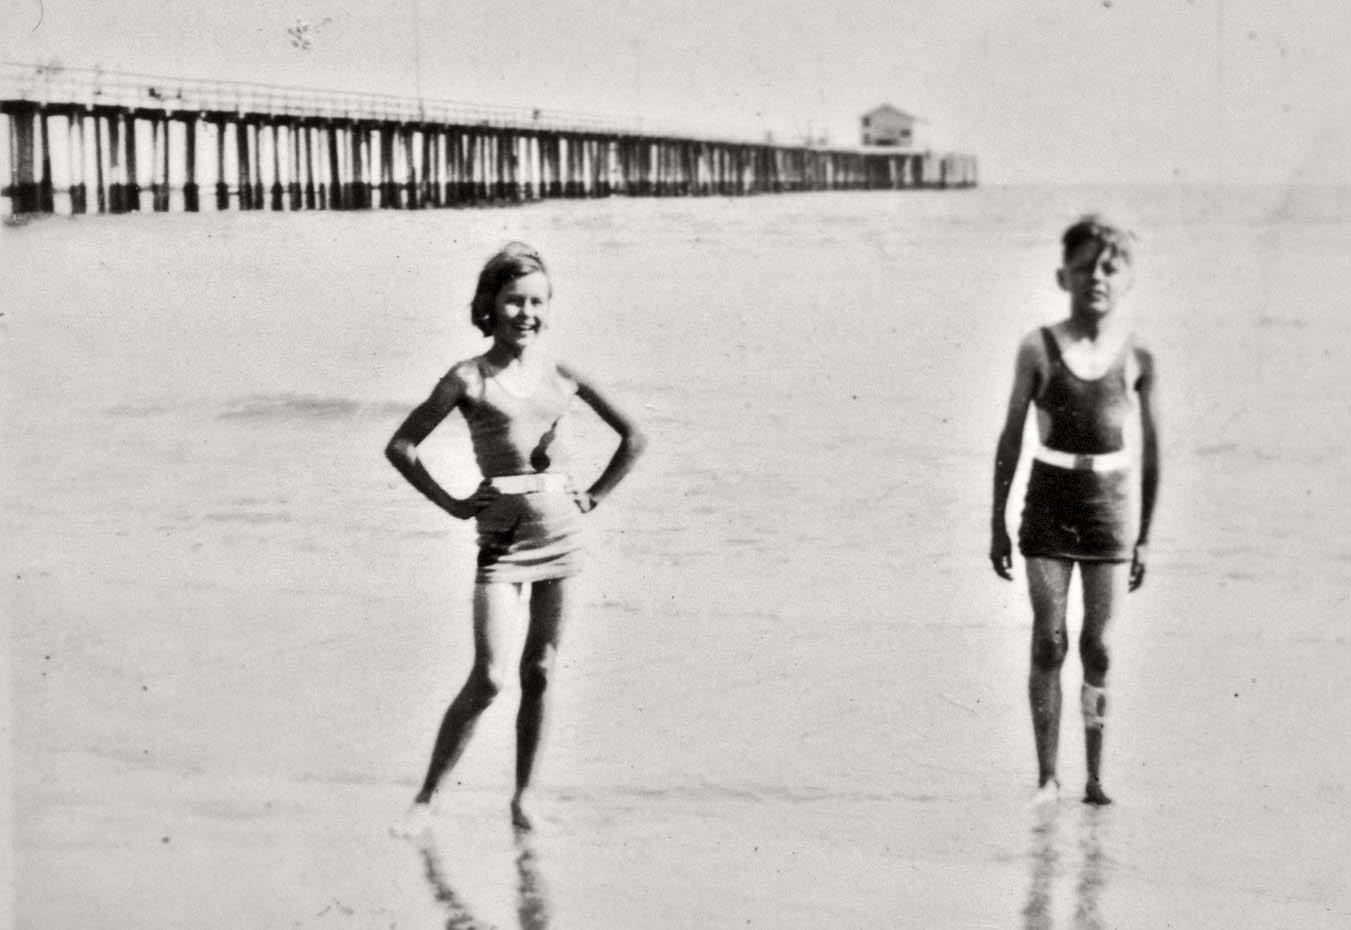 After suffering a bloody shin incident, there was still a smile ready for the camera. My aunt Margaret and father Don were frequent visitors to Avila Beach when growing up in San Luis Obispo, CA. 1933. View full size.